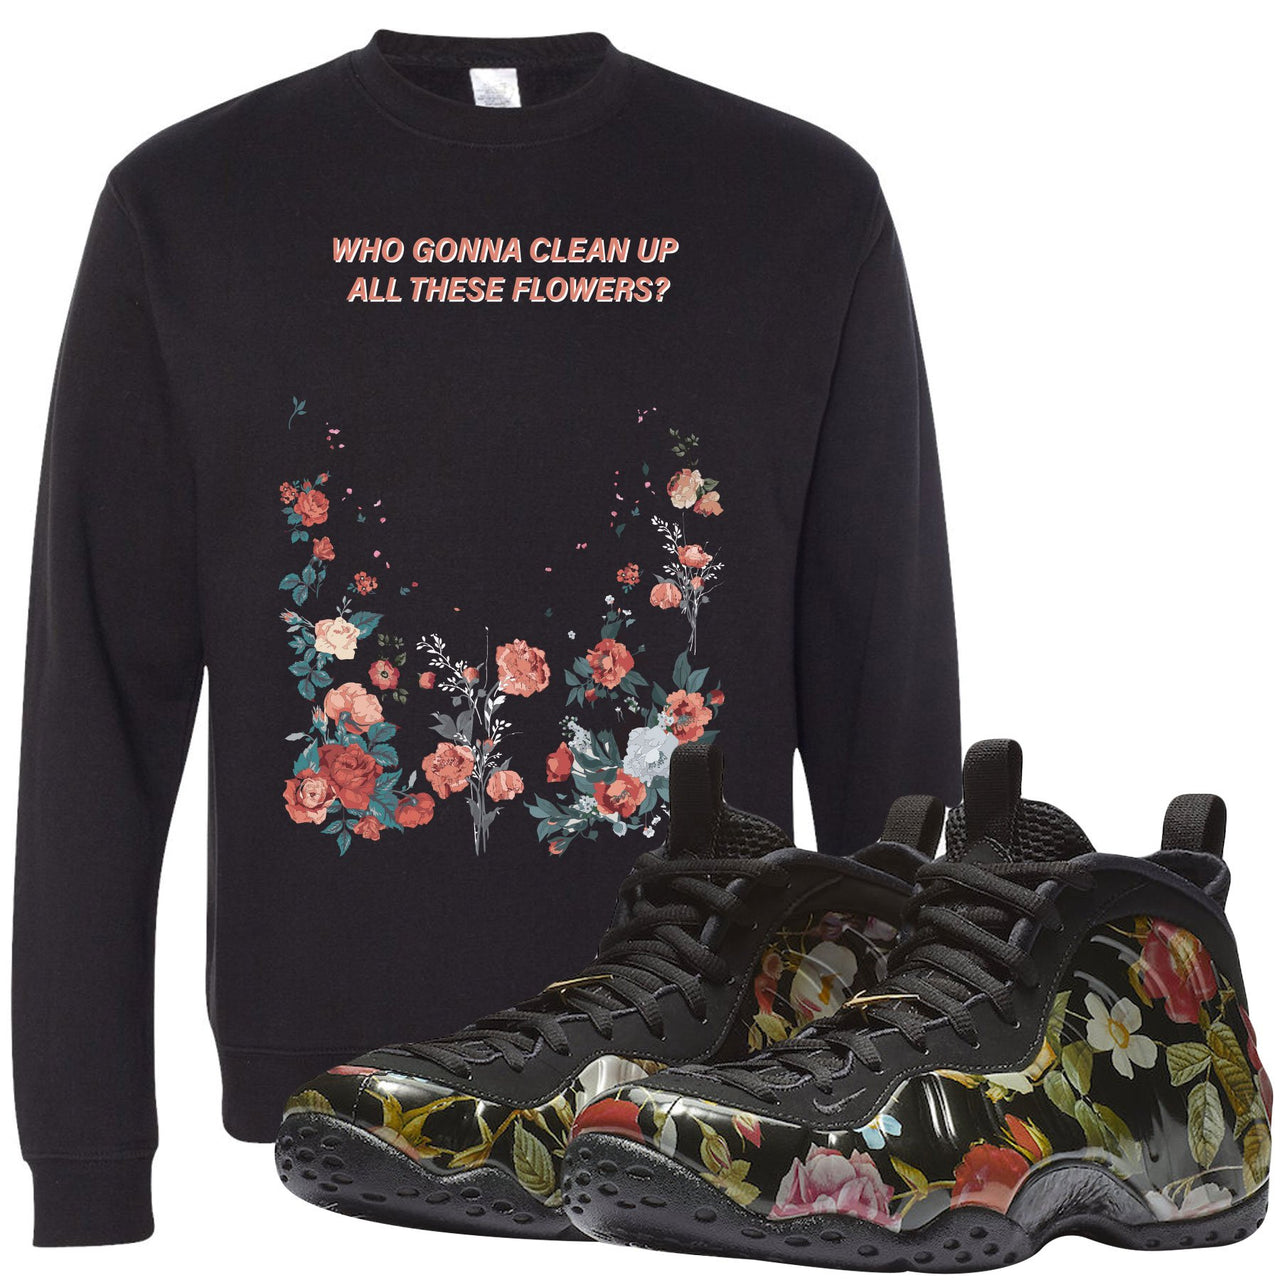 Wear this sneaker matching crewneck to match your Air Foamposite One Floral sneakers. Match your floral foams today!